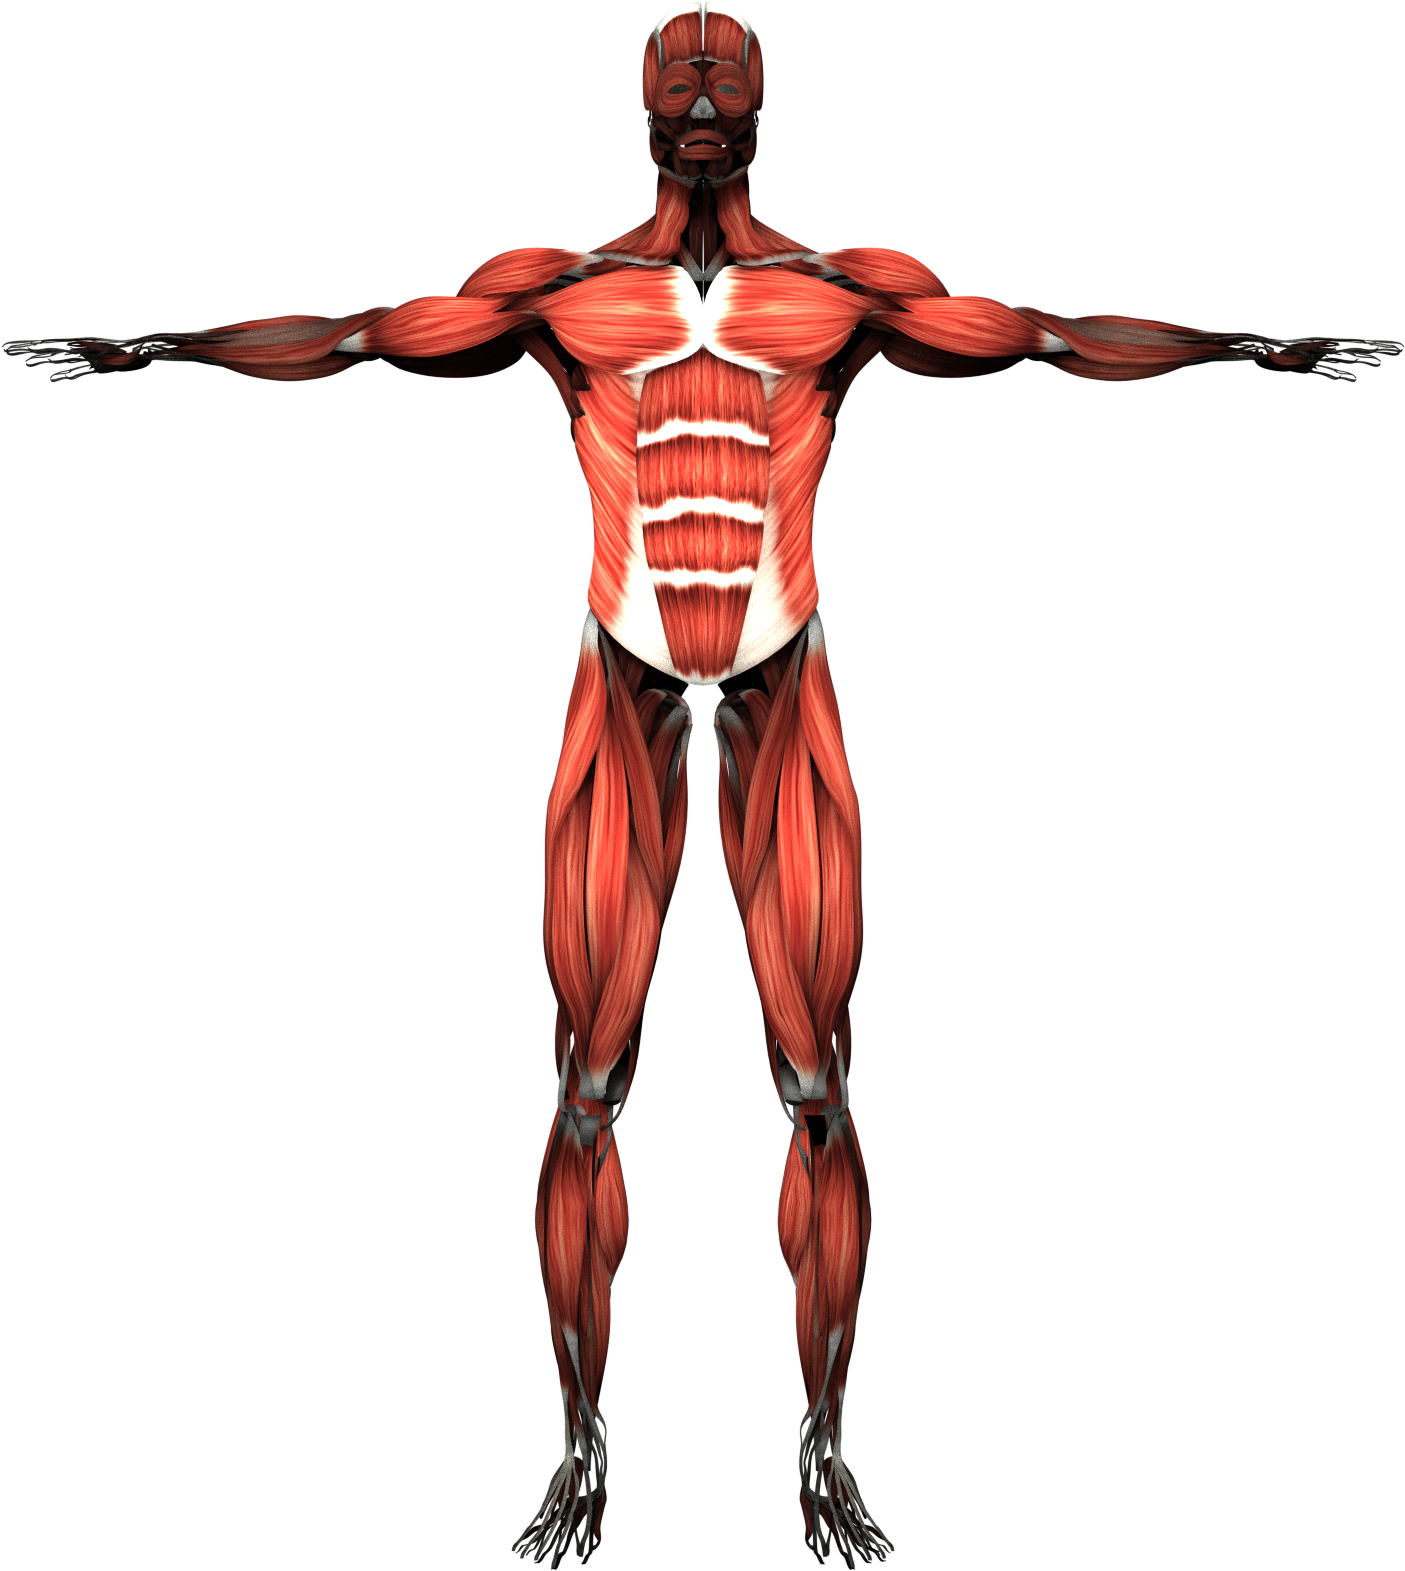 A Human Body With Muscles